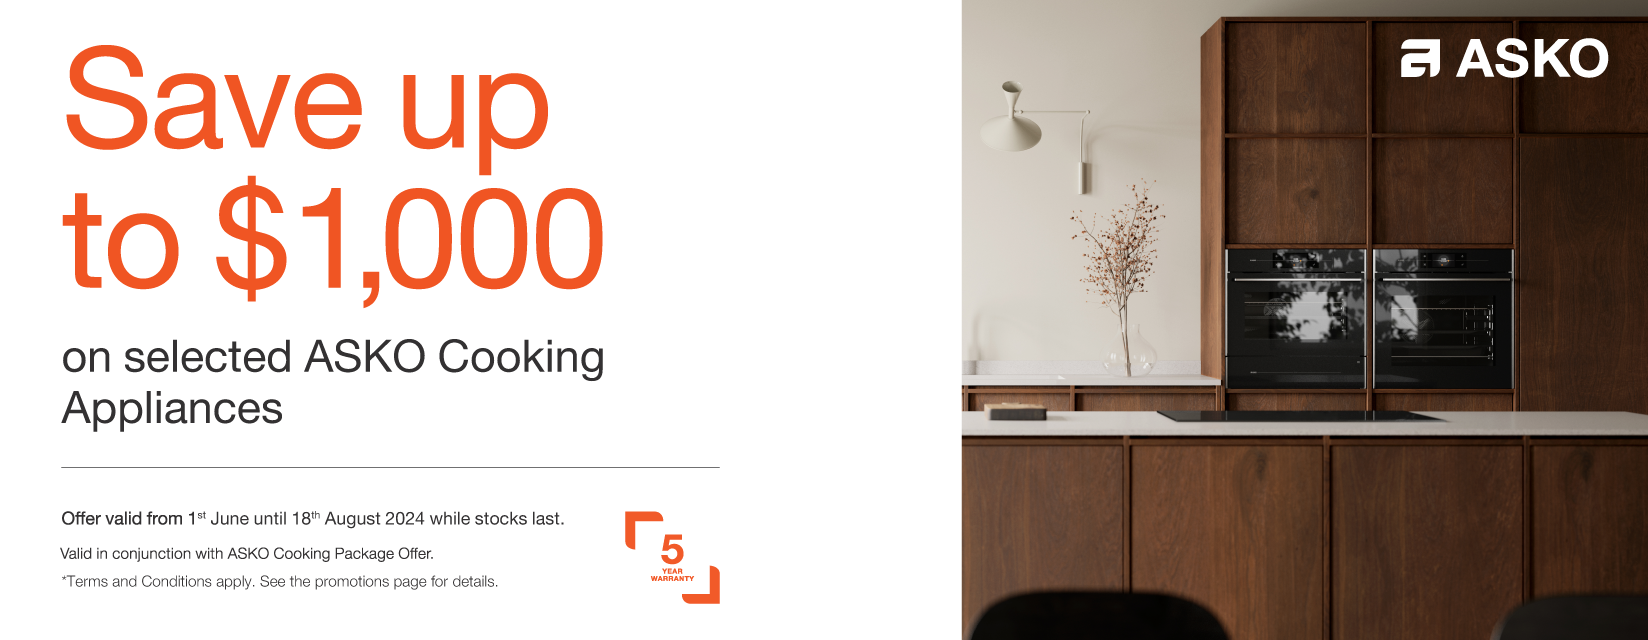 Save Up To $1,000 on Selected ASKO Cooking Appliances at Elite Appliances